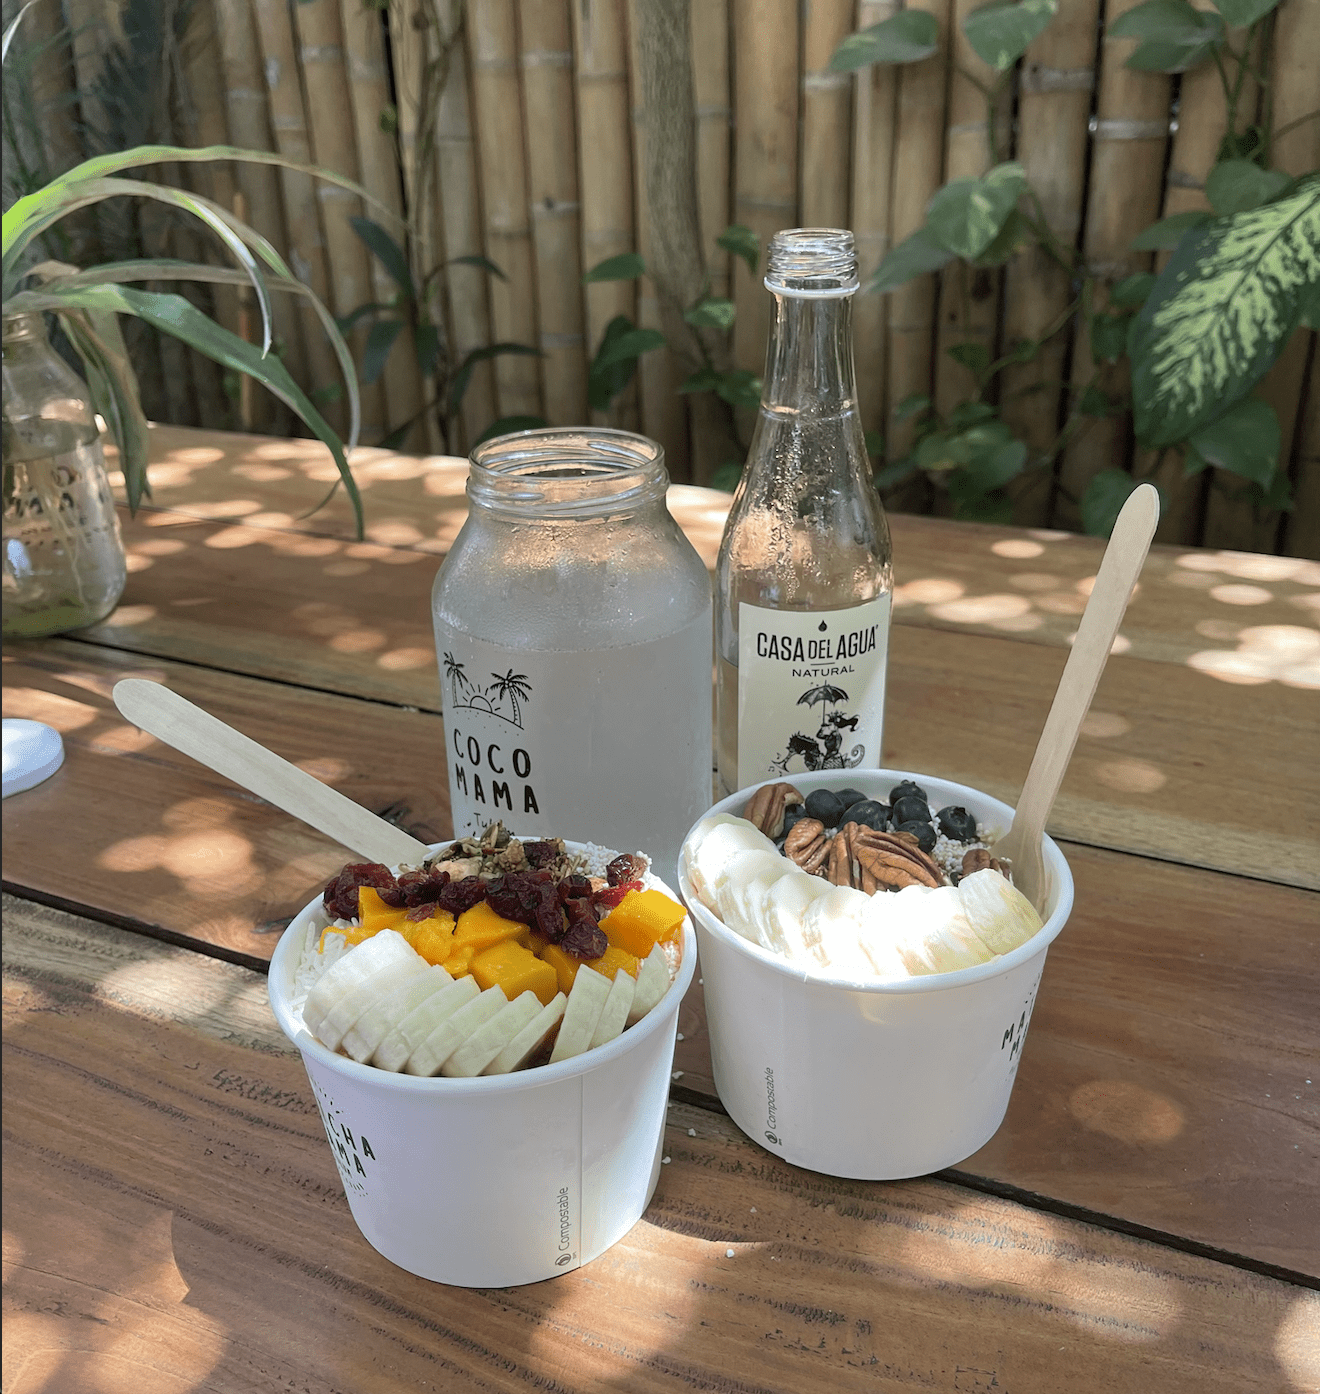 acai bowls from a cute restaurant in Mexico - food is expensive when you travel, if you choose for it to be